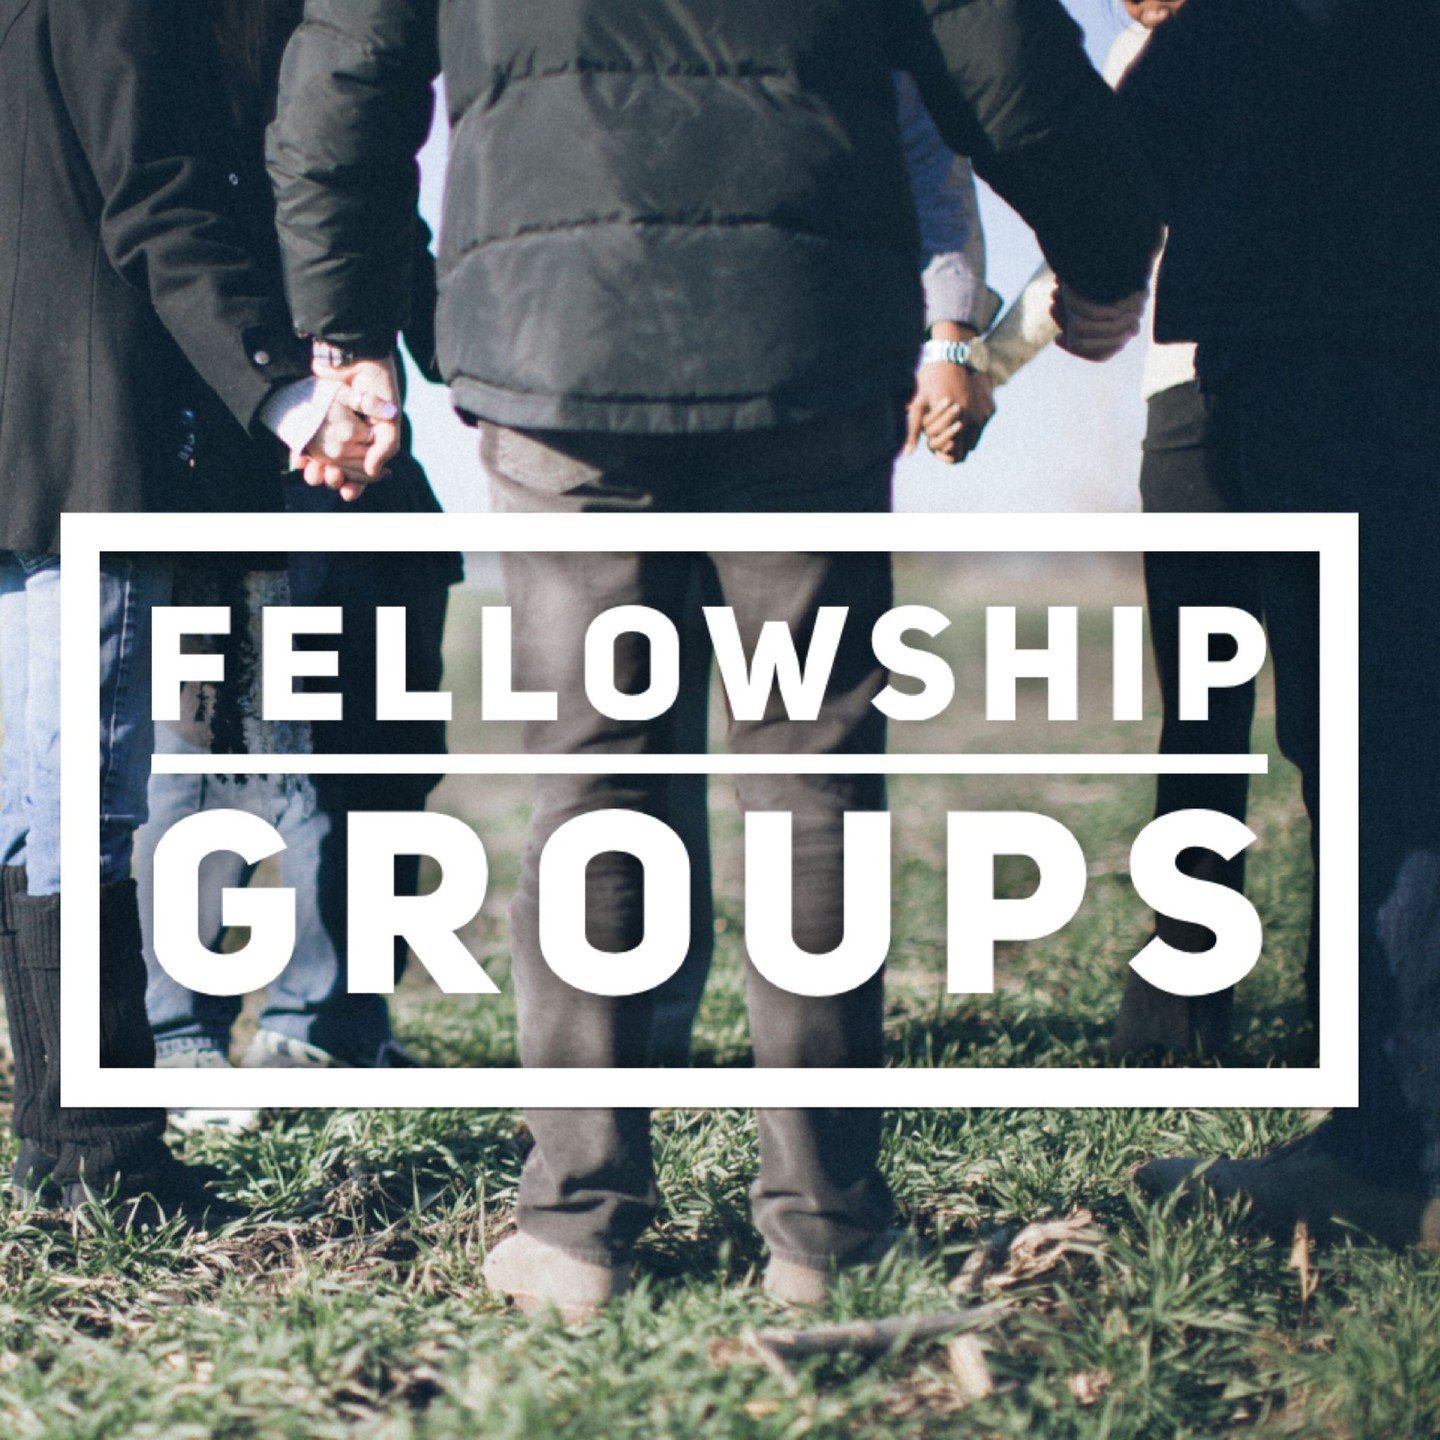 Ready to deepen your connections and grow spiritually? Explore Fellowship Groups at FBC Augusta! Visit https://www.fbcaugustaks.org/adult-family for more info. #GetConnected #FellowshipGroups #Community #fbcaugustaks